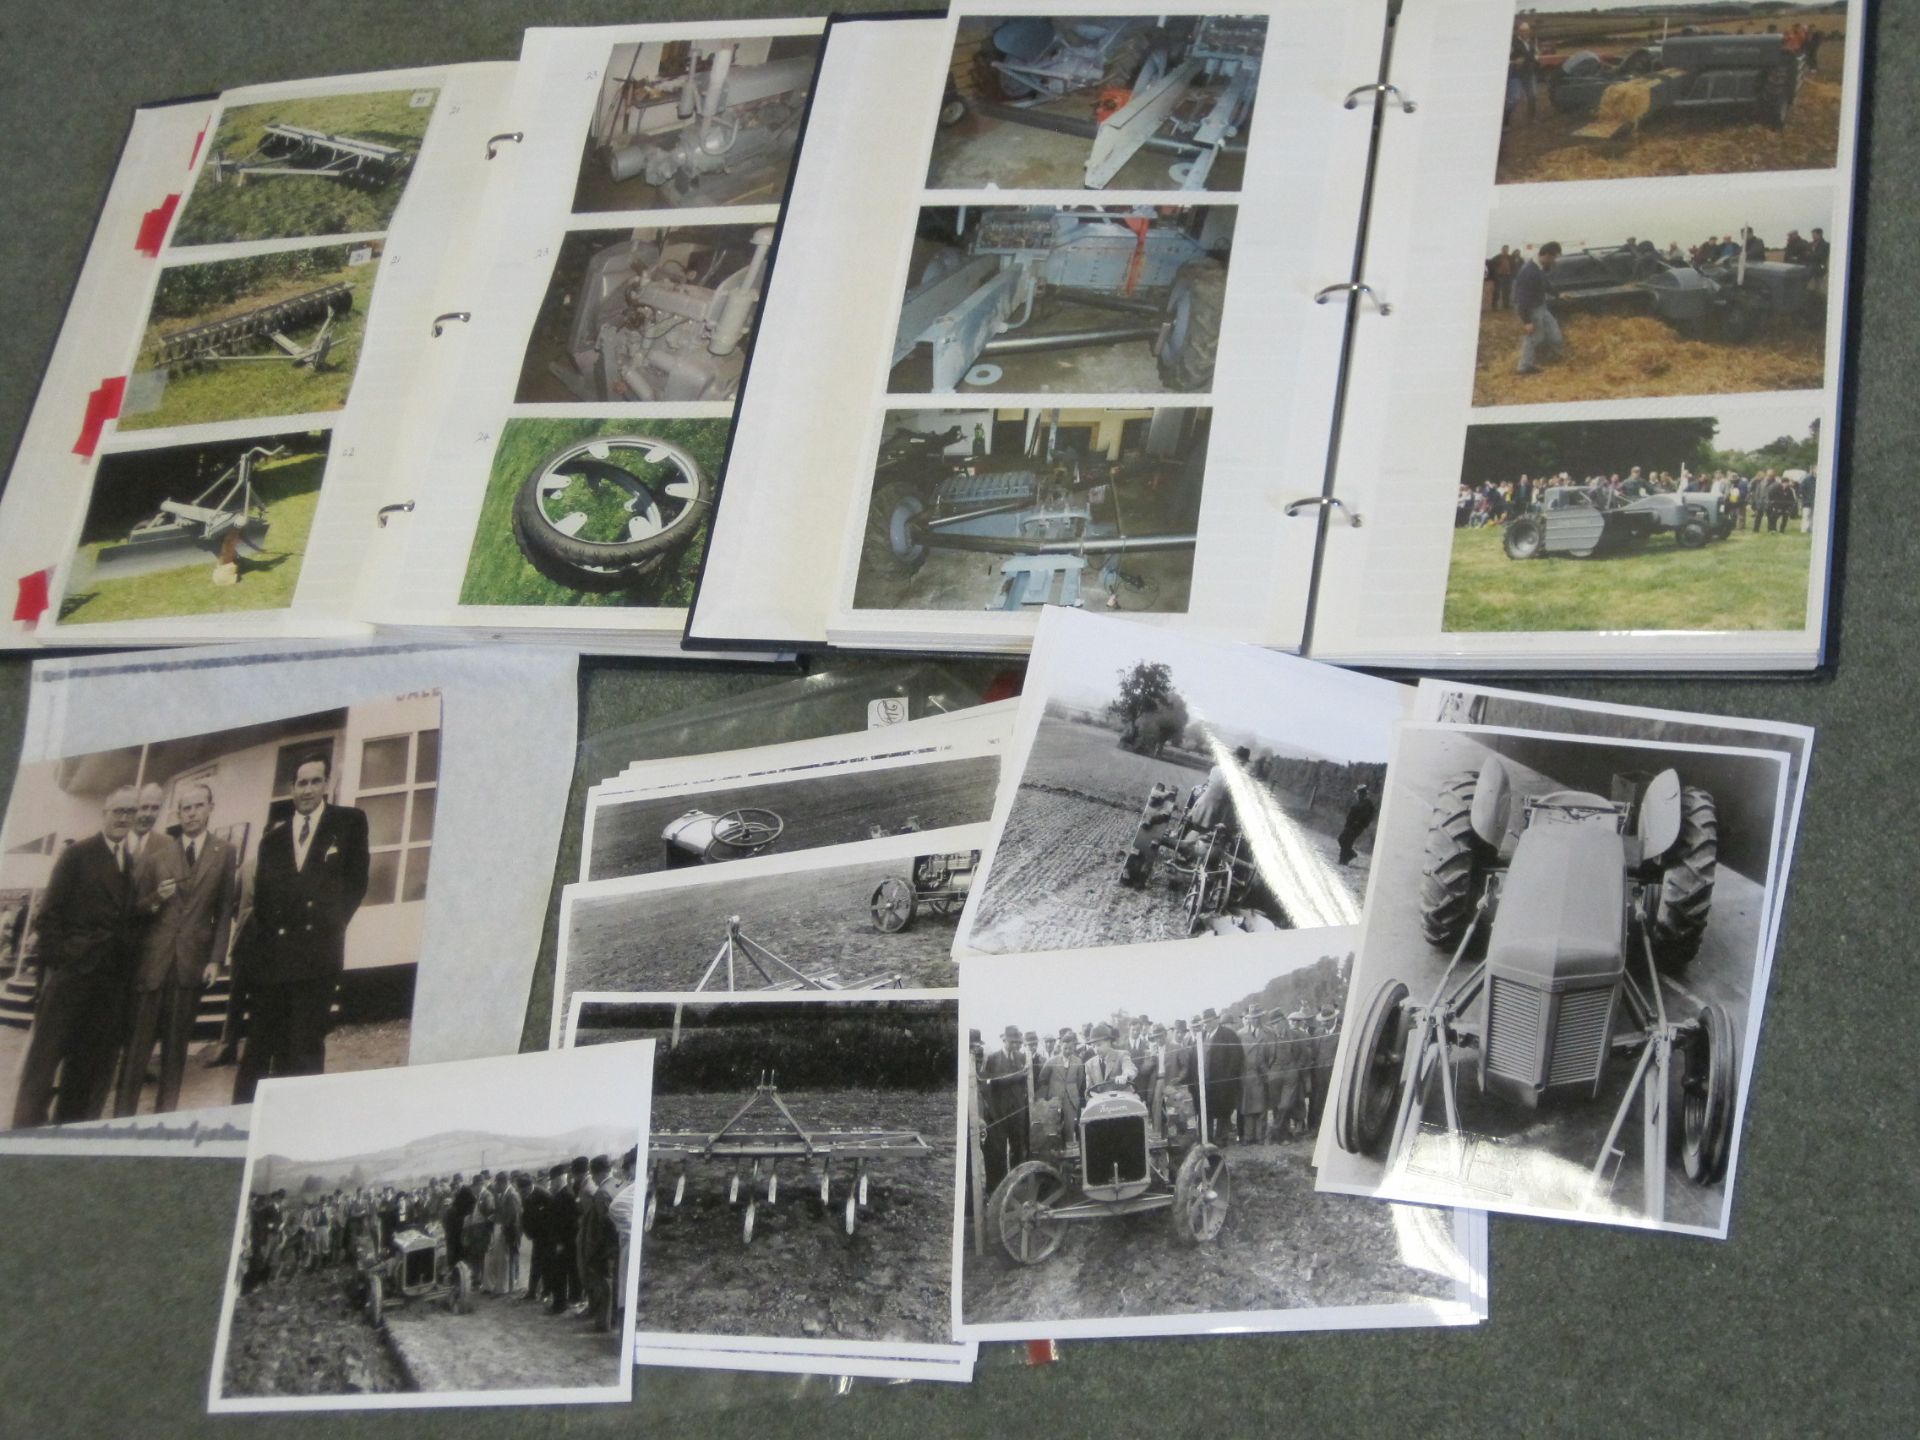 2no. photo albums containing a photographic record of the Hunday Collection including working images